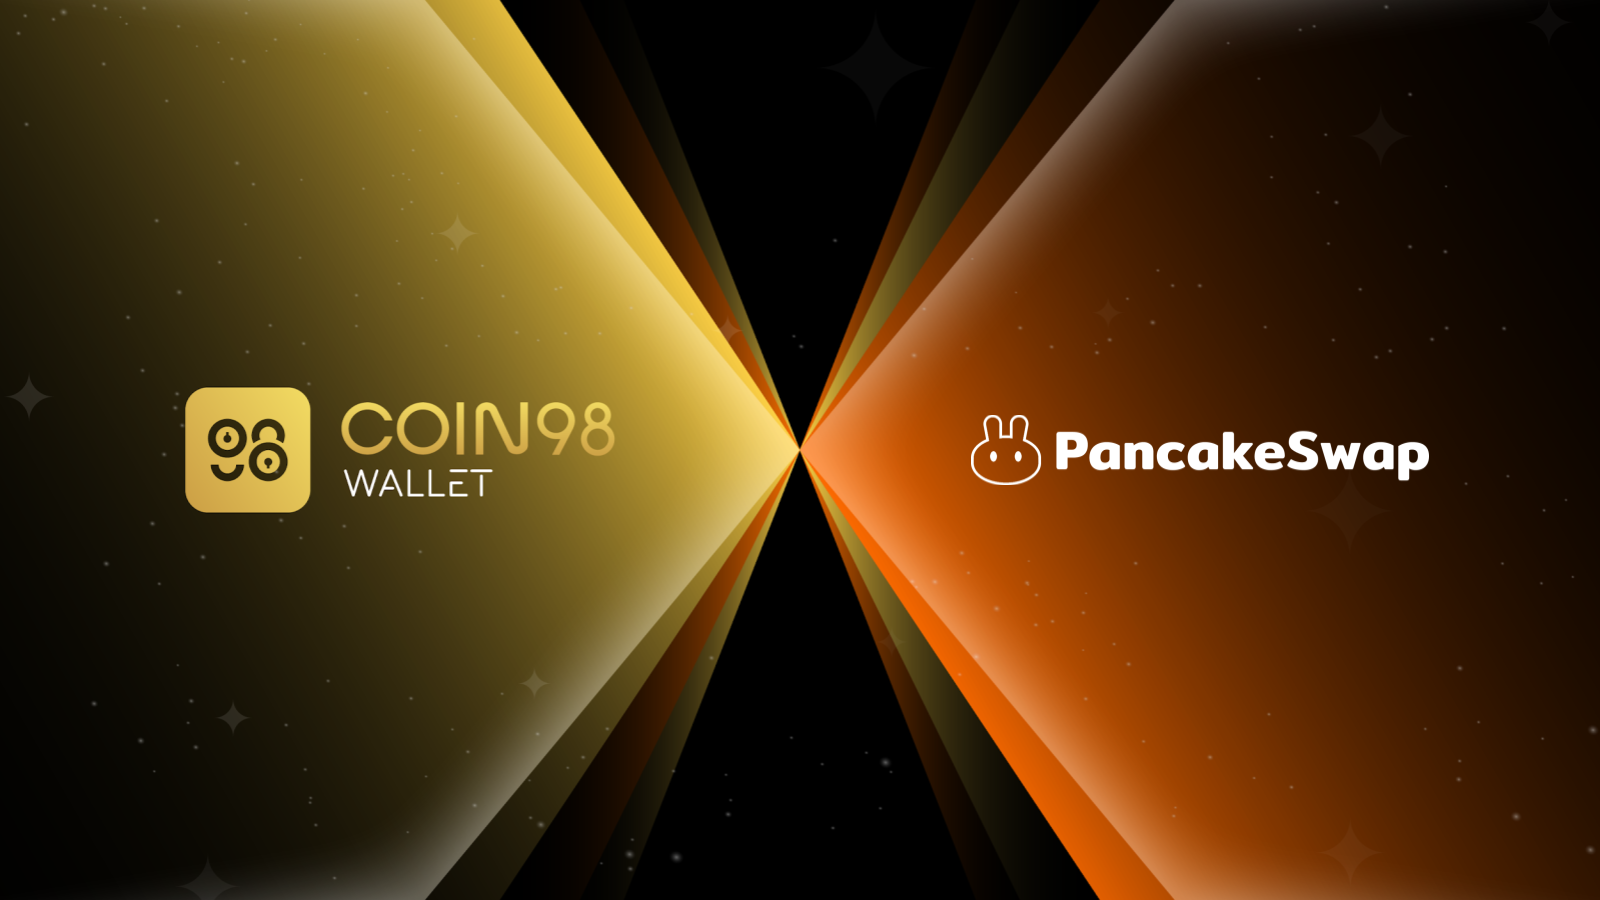 Coin98 Wallet integrates with PancakeSwap, bringing the benefits of our multi-chain wallet to more users worldwide